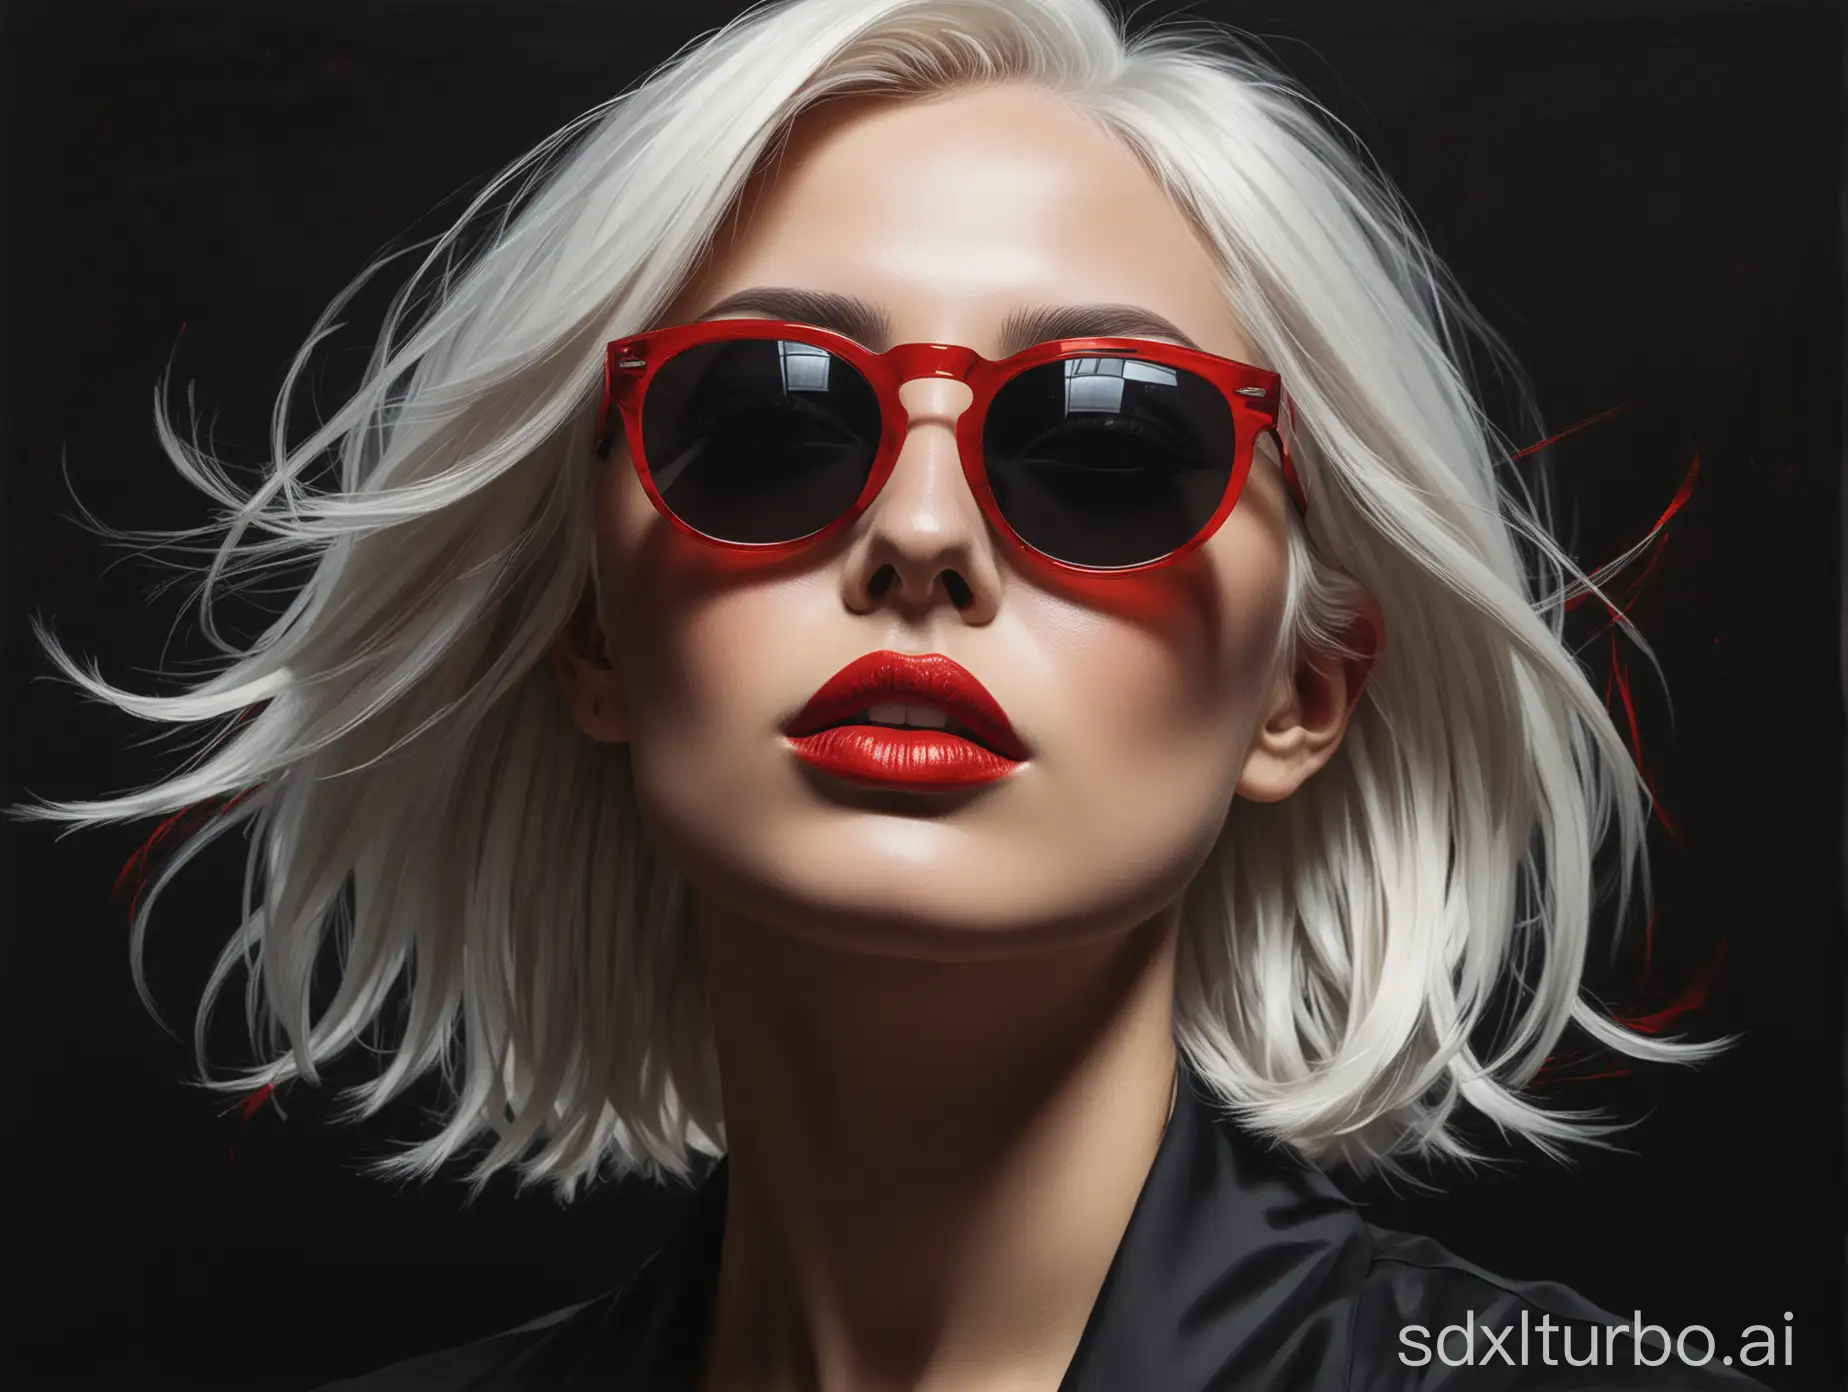 Stylized-Portrait-of-a-Woman-with-Striking-White-Hair-and-Red-Lips